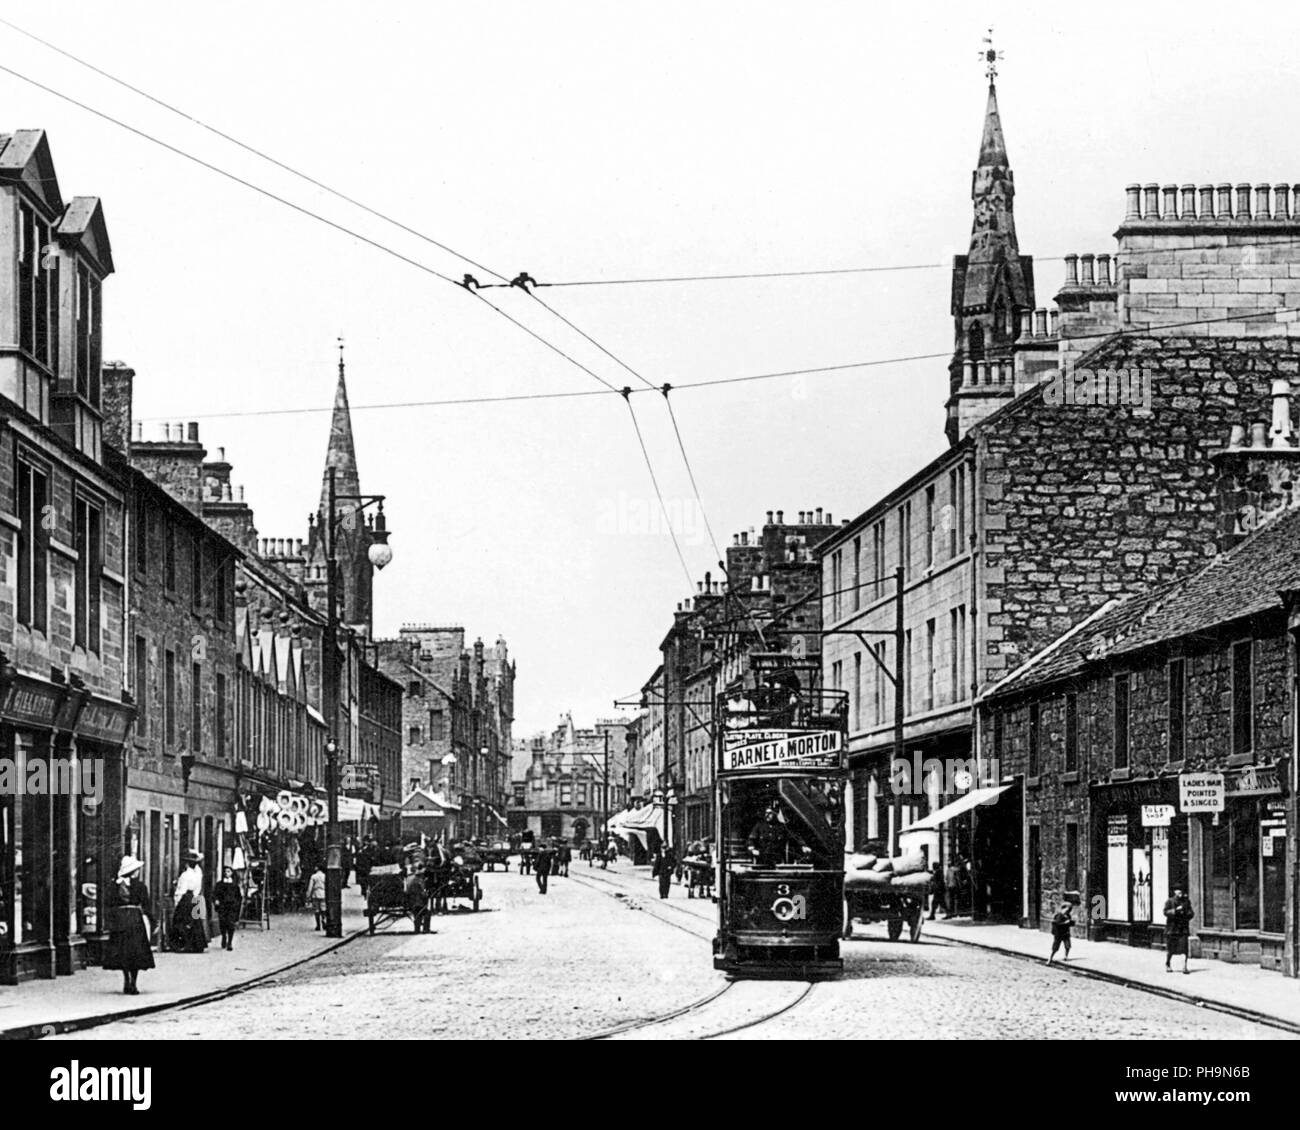 Tram on the High Street, Kirkcaldy, early 1900s Stock Photo